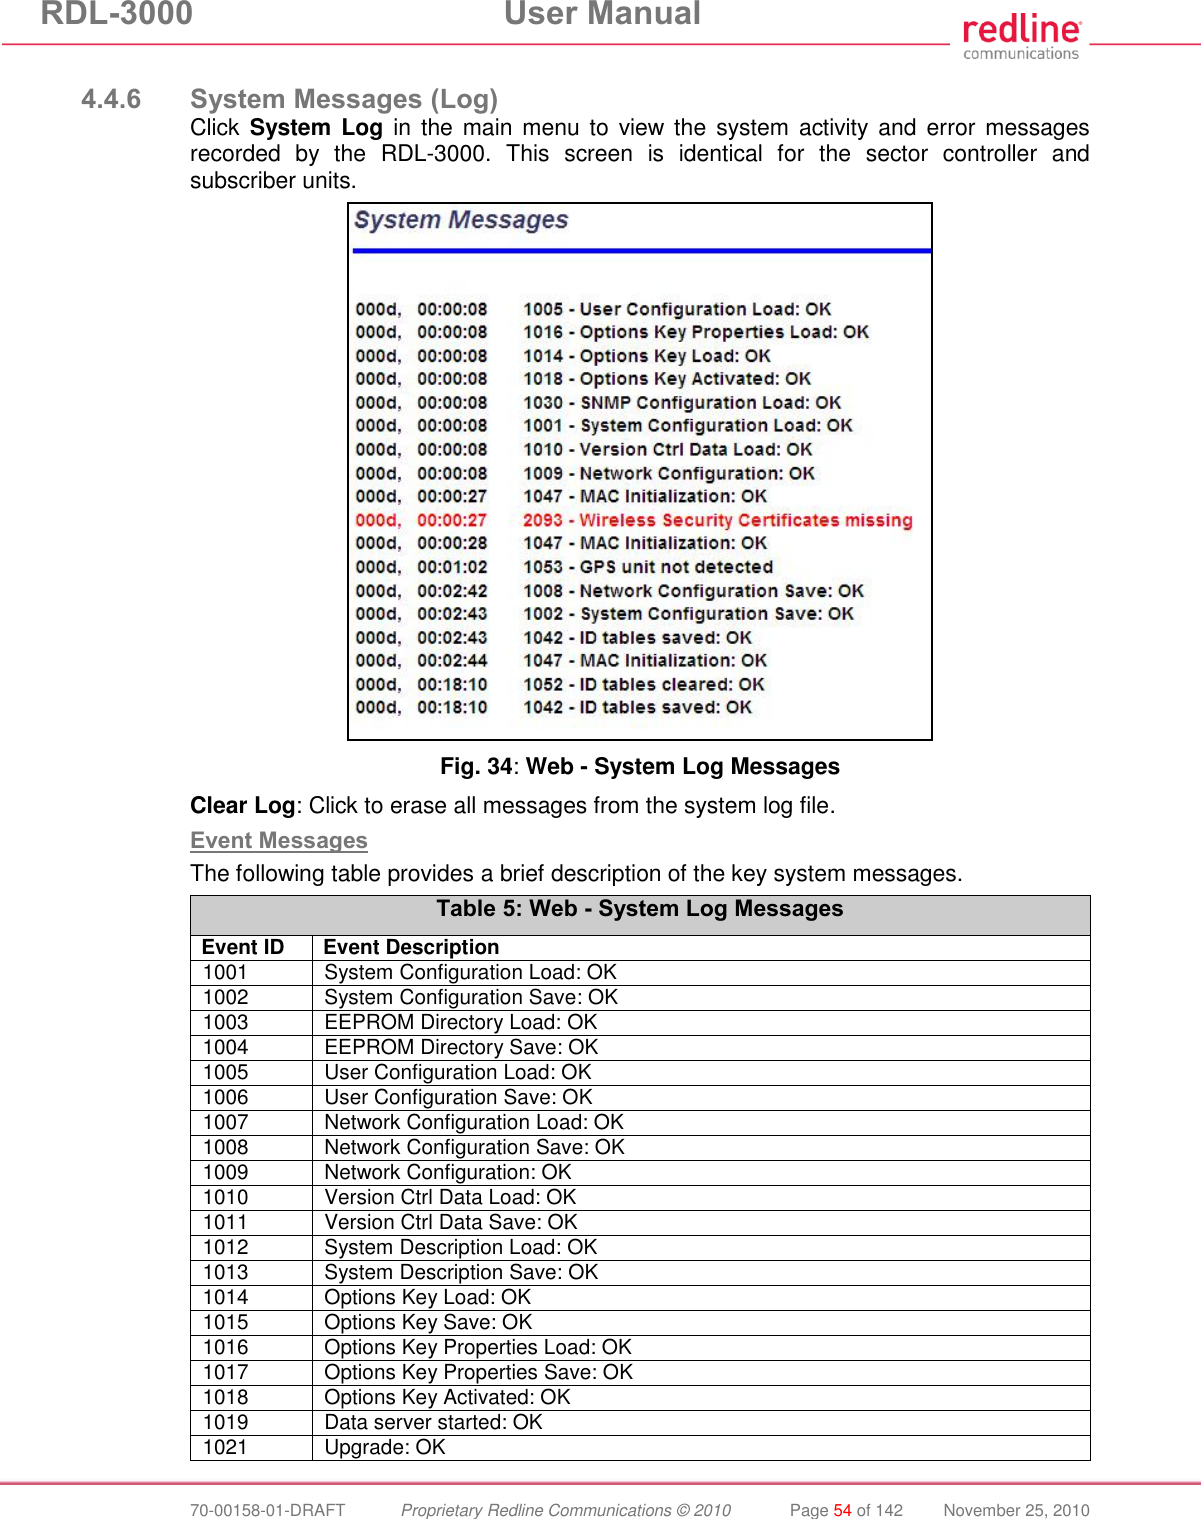 RDL-3000  User Manual  70-00158-01-DRAFT  Proprietary Redline Communications © 2010  Page 54 of 142  November 25, 2010  4.4.6 System Messages (Log) Click System Log  in  the main menu to  view the  system  activity and  error messages recorded  by  the  RDL-3000.  This  screen  is  identical  for  the  sector  controller  and subscriber units.   Fig. 34: Web - System Log Messages Clear Log: Click to erase all messages from the system log file. Event Messages The following table provides a brief description of the key system messages. Table 5: Web - System Log Messages Event ID Event Description 1001  System Configuration Load: OK 1002  System Configuration Save: OK 1003  EEPROM Directory Load: OK 1004  EEPROM Directory Save: OK 1005  User Configuration Load: OK 1006  User Configuration Save: OK 1007  Network Configuration Load: OK 1008  Network Configuration Save: OK 1009  Network Configuration: OK 1010  Version Ctrl Data Load: OK 1011  Version Ctrl Data Save: OK 1012  System Description Load: OK 1013  System Description Save: OK 1014  Options Key Load: OK 1015  Options Key Save: OK 1016  Options Key Properties Load: OK 1017  Options Key Properties Save: OK 1018  Options Key Activated: OK 1019  Data server started: OK 1021  Upgrade: OK 